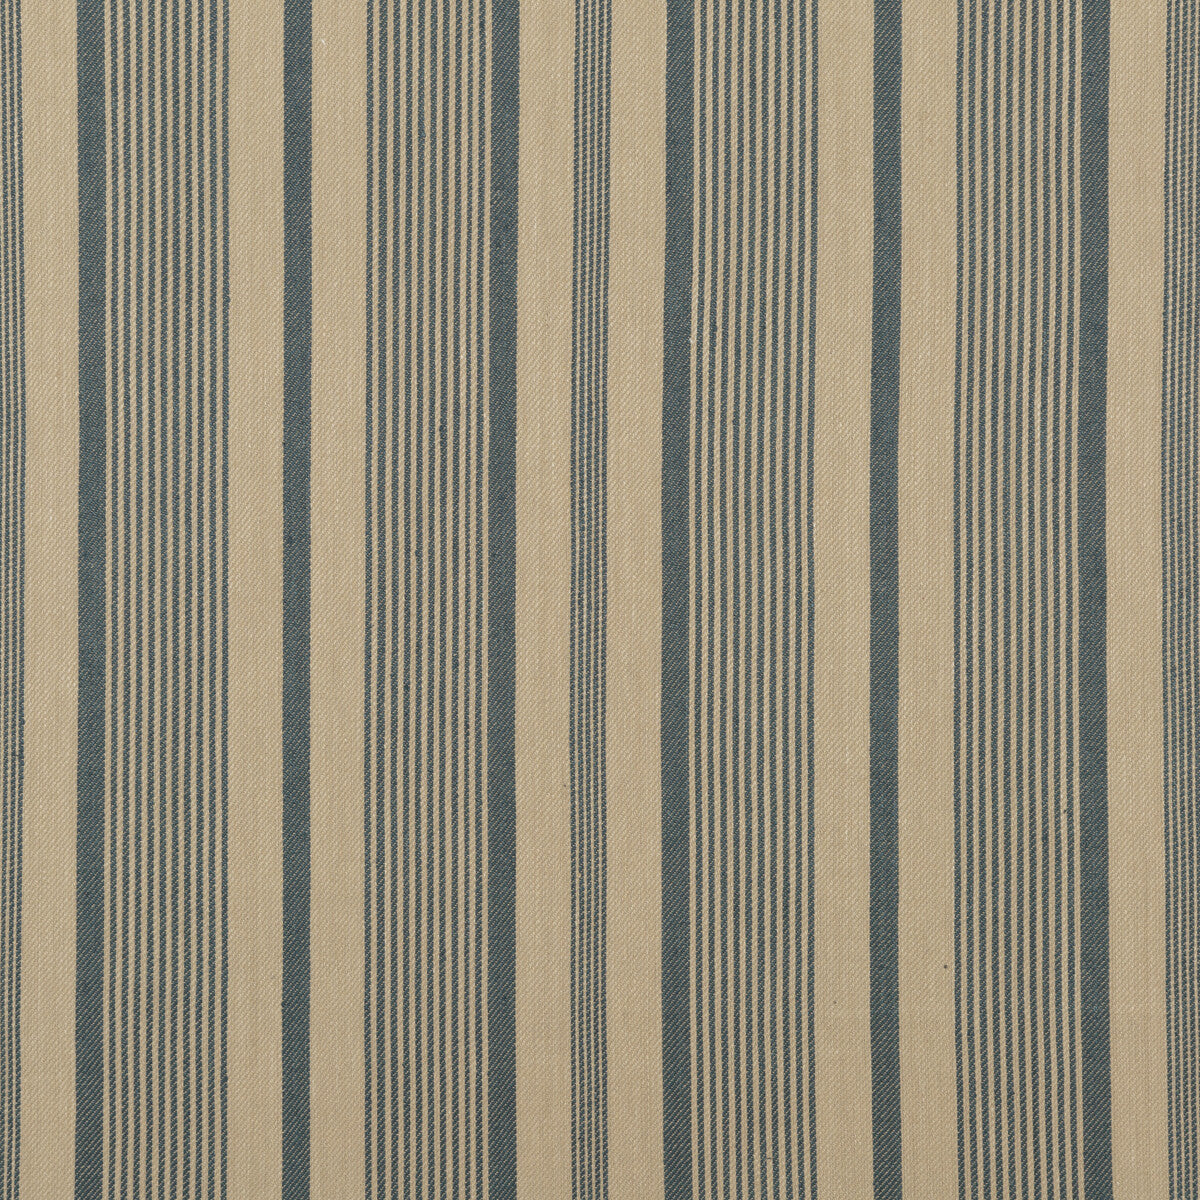 College Stripe fabric in teal/linen color - pattern FD758.R30.0 - by Mulberry in the Festival collection